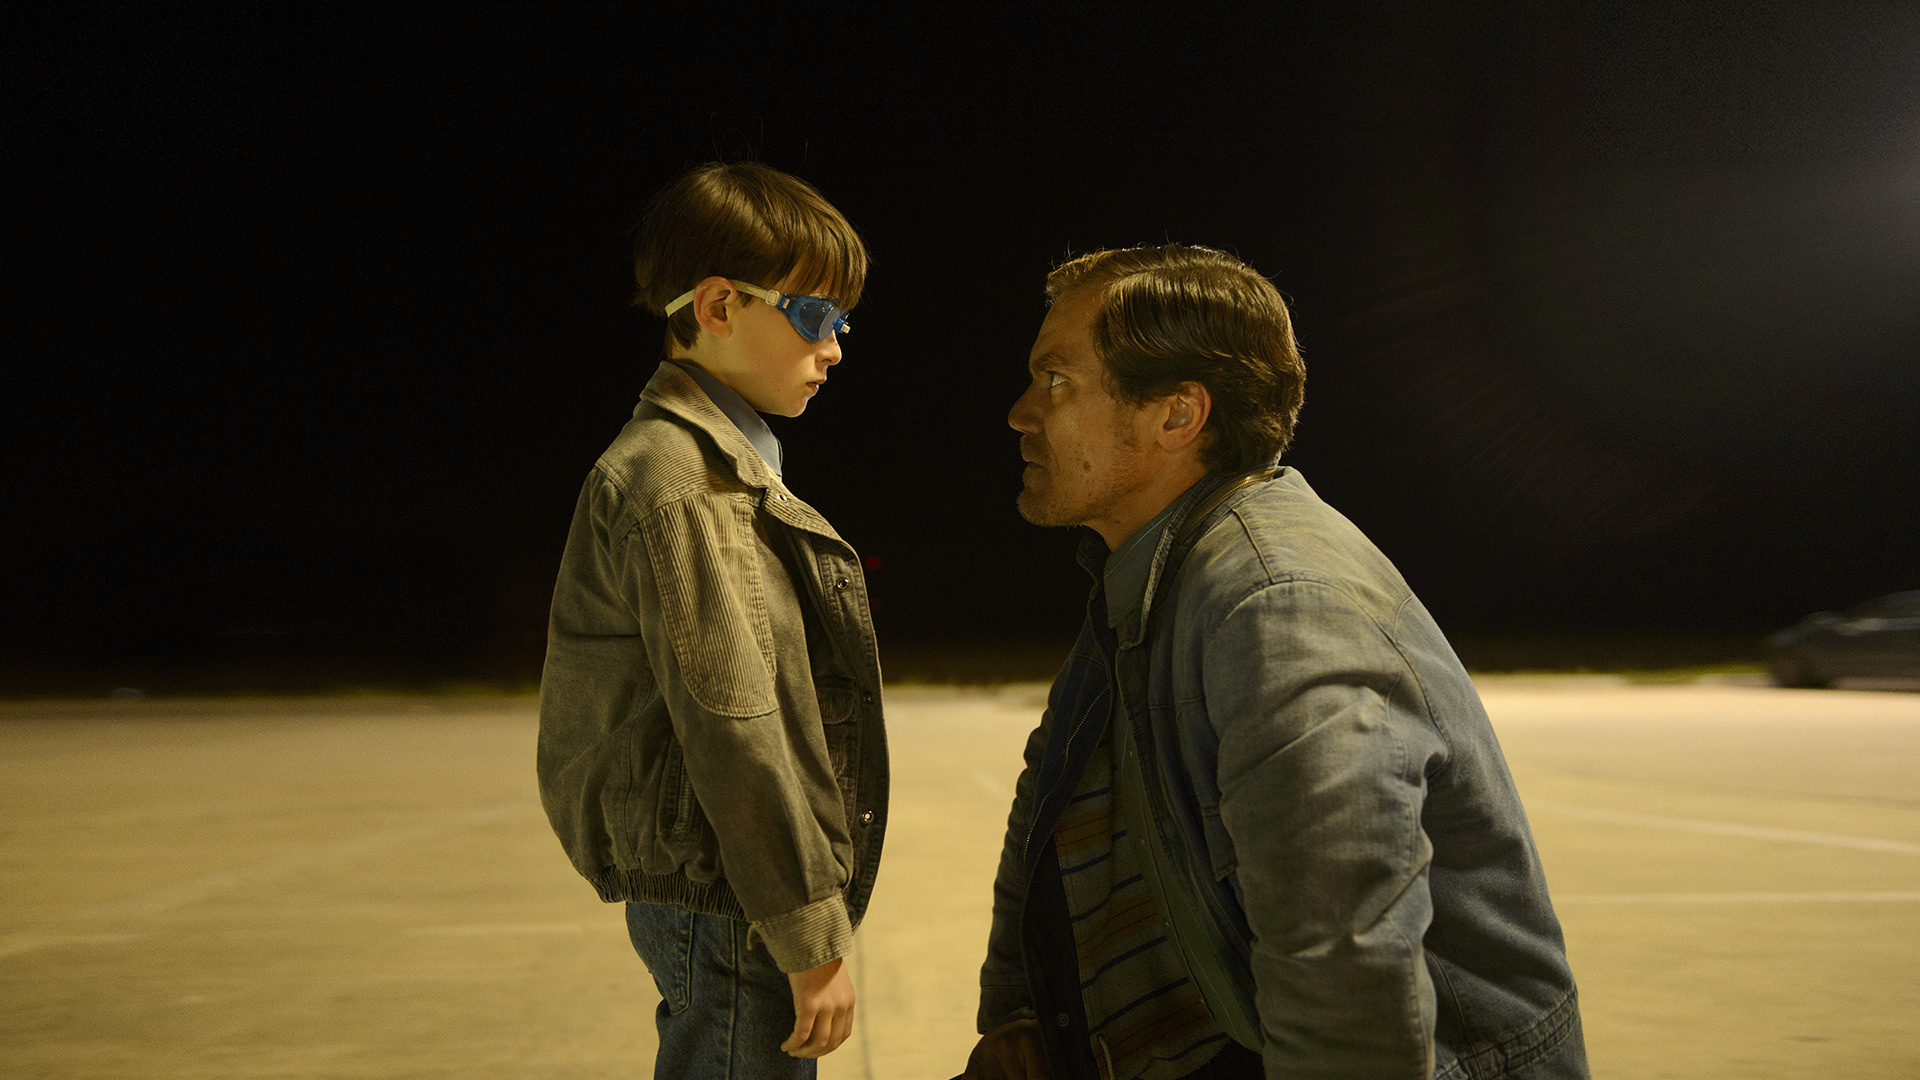 Michael Shannon: Midnight Special, An American science fiction 2016 film, Written and directed by Jeff Nichols, Produced by Sarah Green and Brian Kavanaugh-Jones. 1920x1080 Full HD Wallpaper.